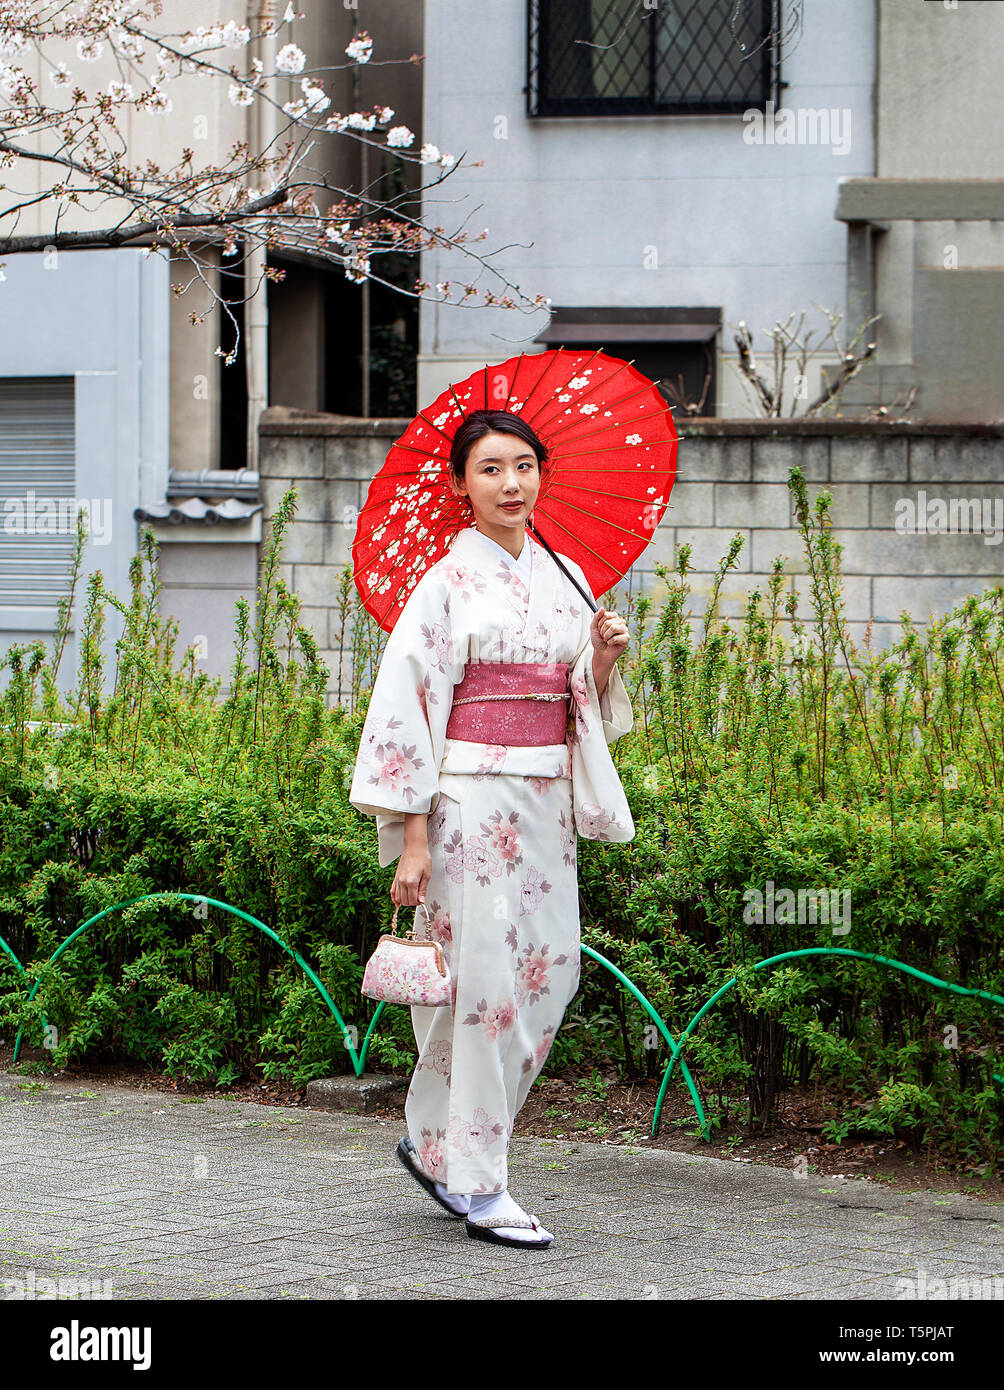 Beautiful Japanese woman in white kimono with red sash and red umbrella in a park next to a cherry blossom tree Stock Photo